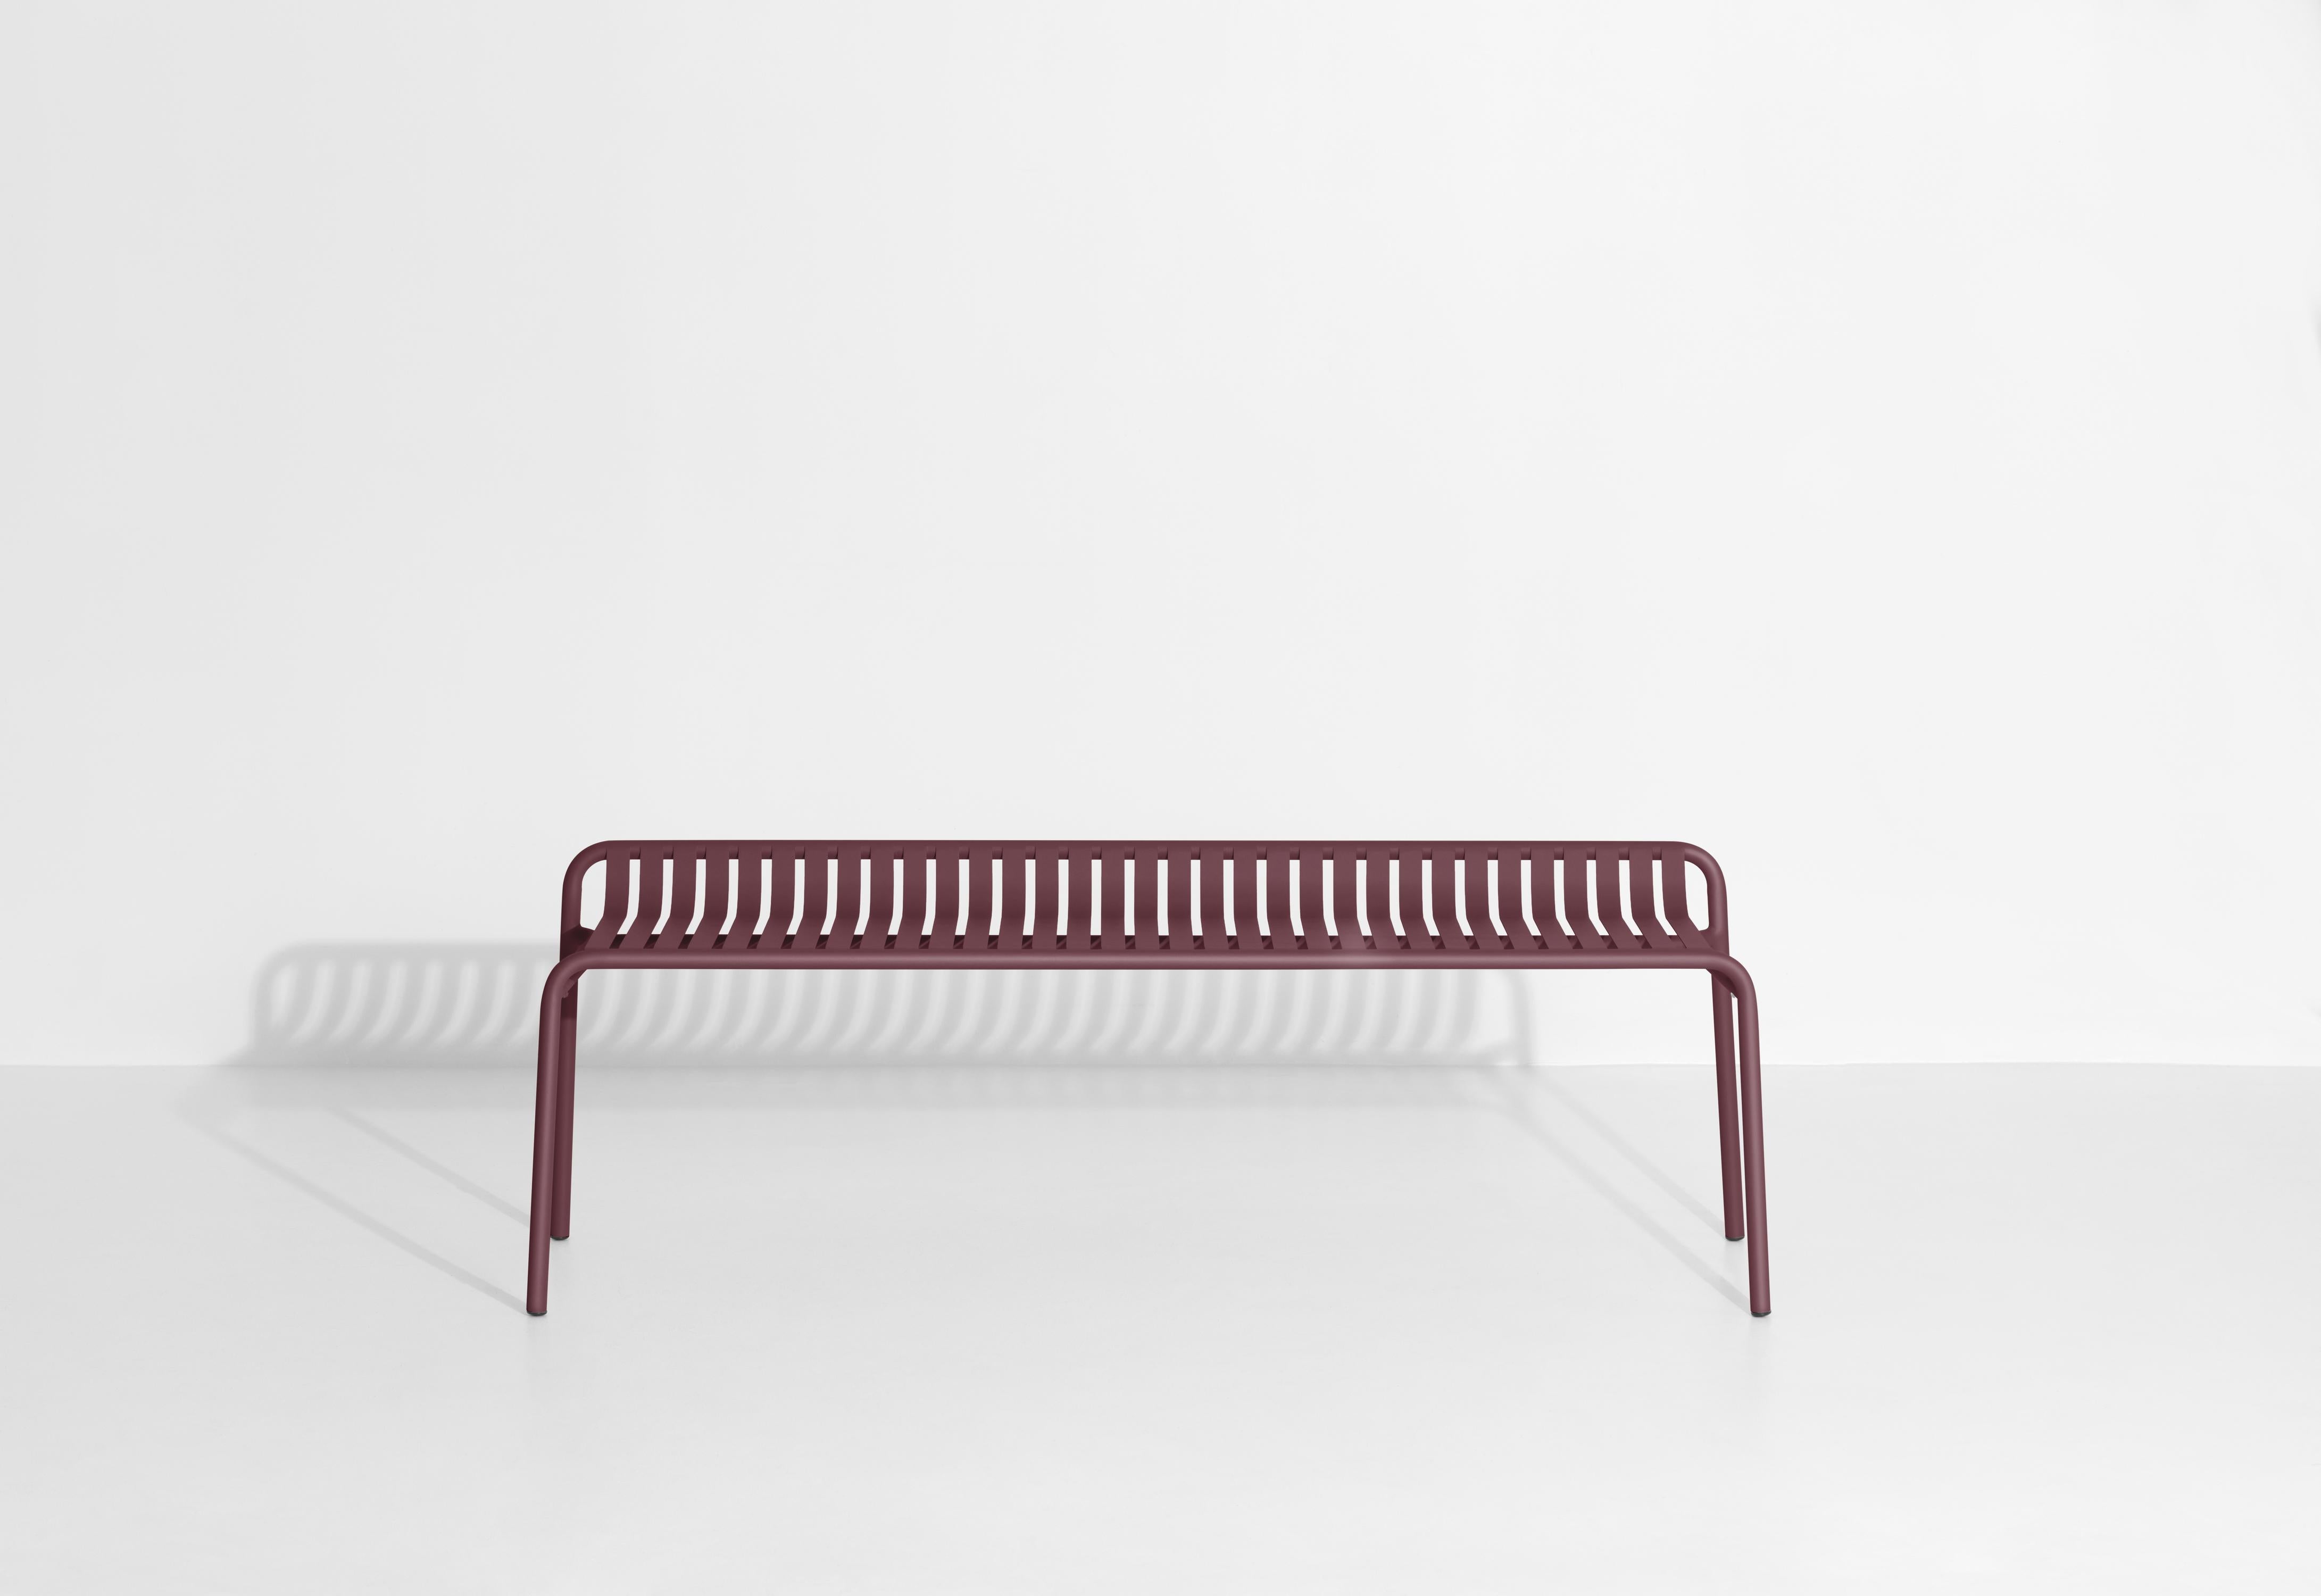 Petite Friture Week-End Bench without Back in Burgundy Aluminium, 2017  In New Condition For Sale In Brooklyn, NY